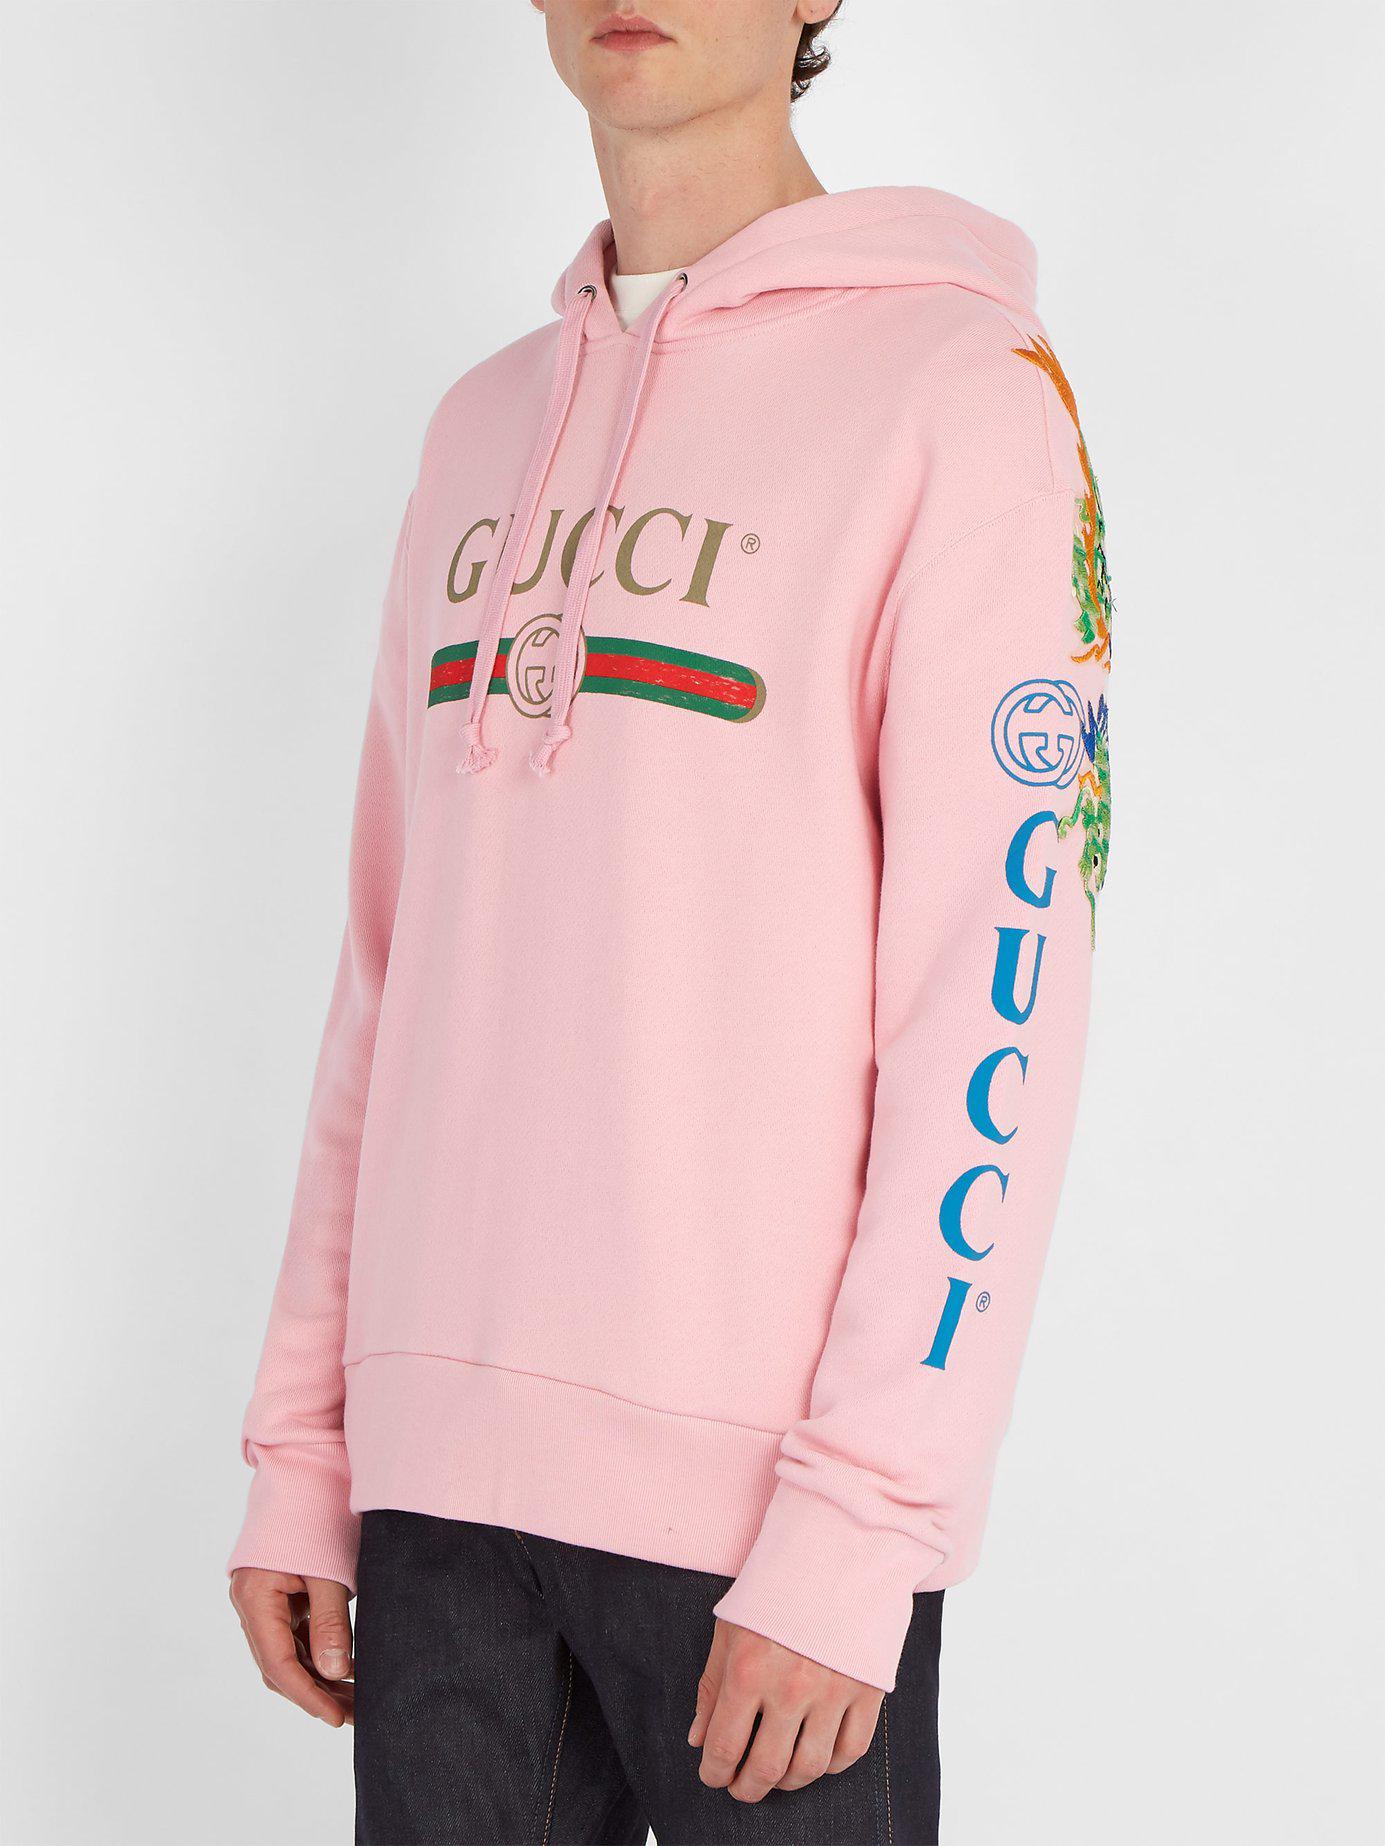 Sweat Gucci Rose Outlet, GET 51% OFF, cleavereast.ie